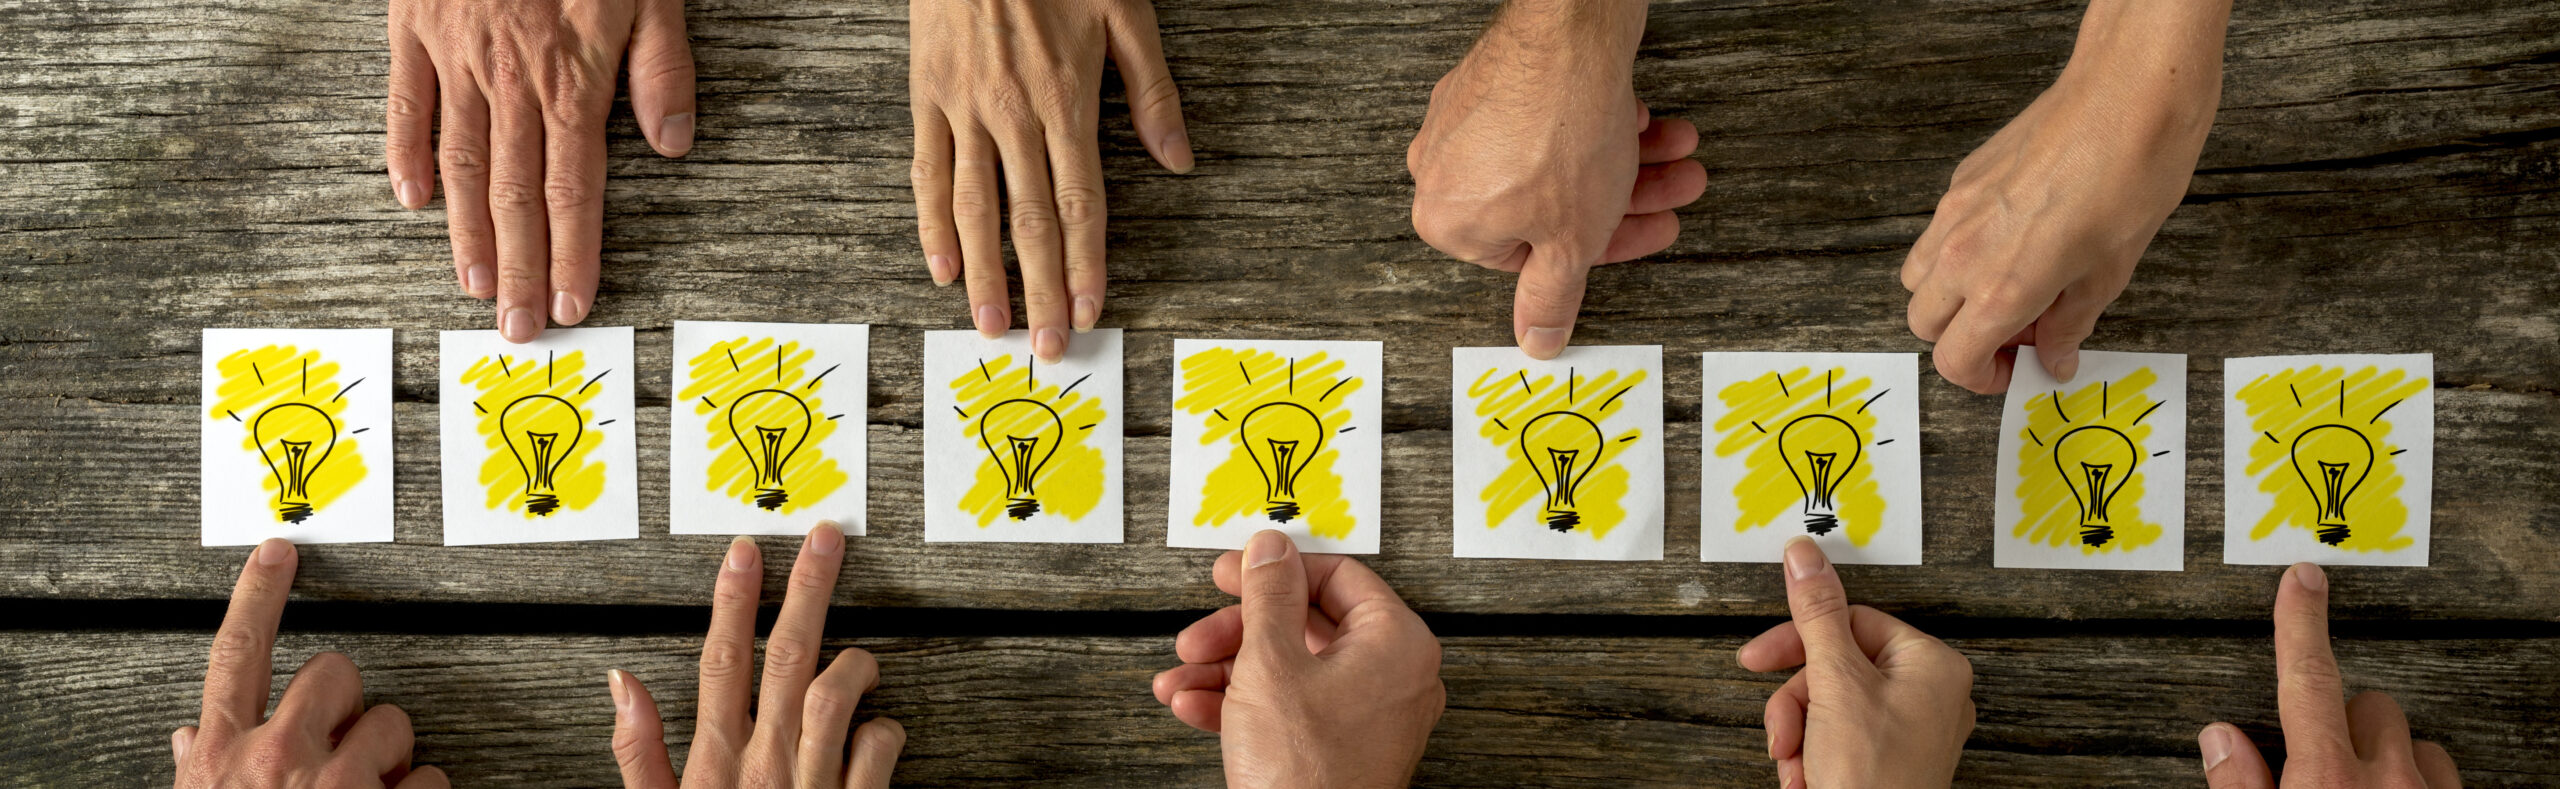 Brainstorming and teamwork concept with a group of diverse business people each holding out a card with a shining light bulb arranged in a row conceptual of ideas, inspiration and innovation.